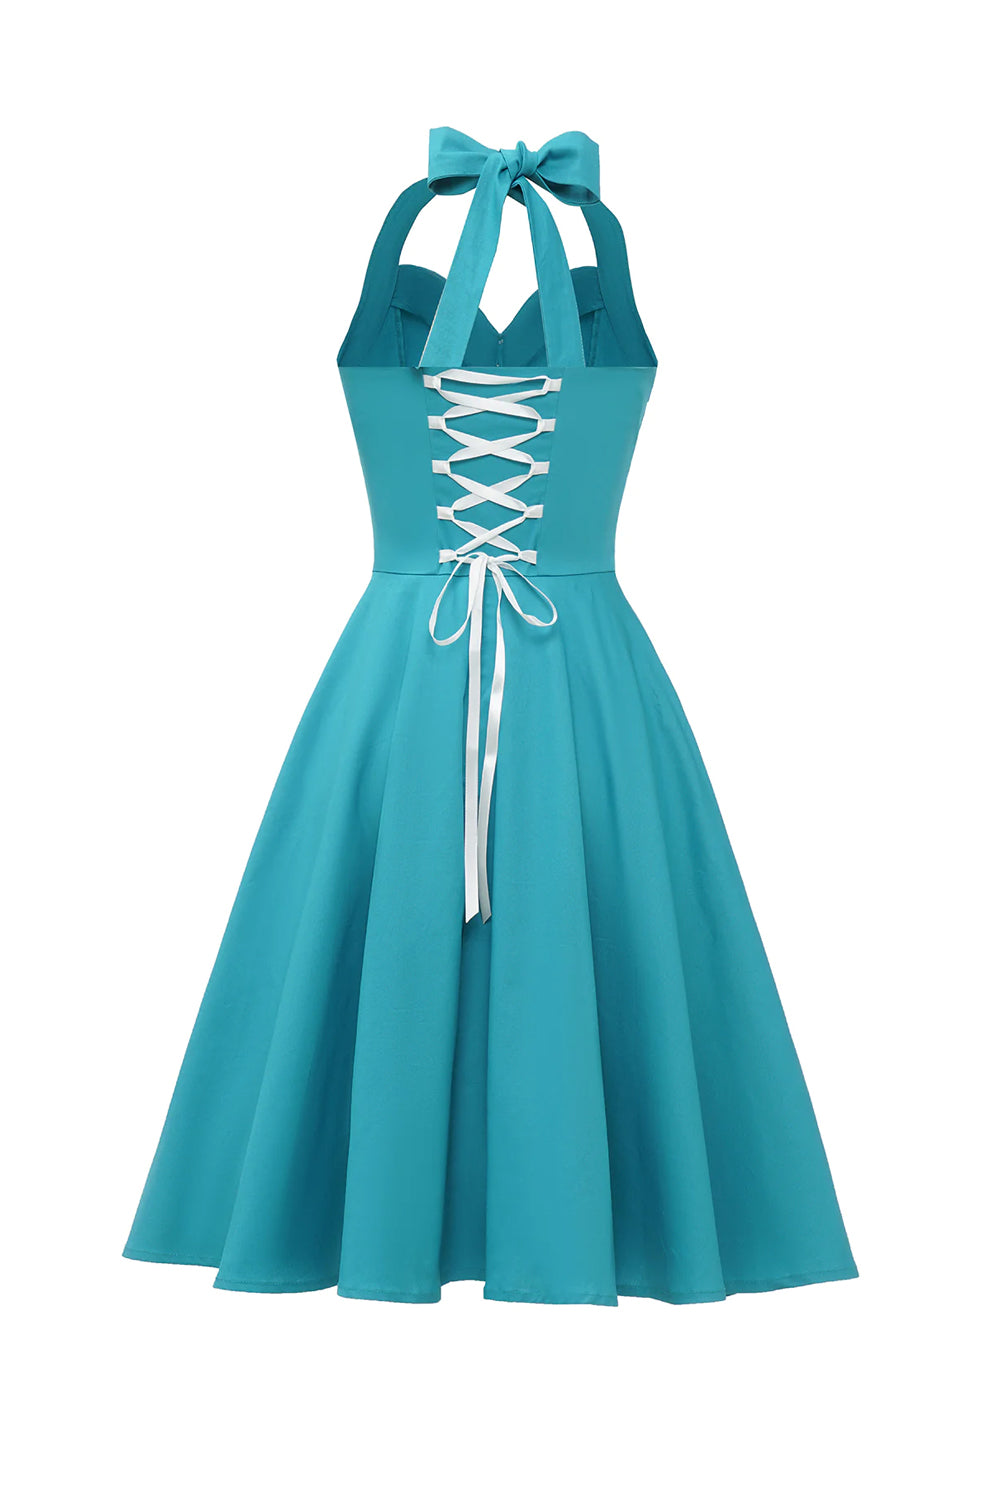 Halter Blue Vintage Dress with Bowknot